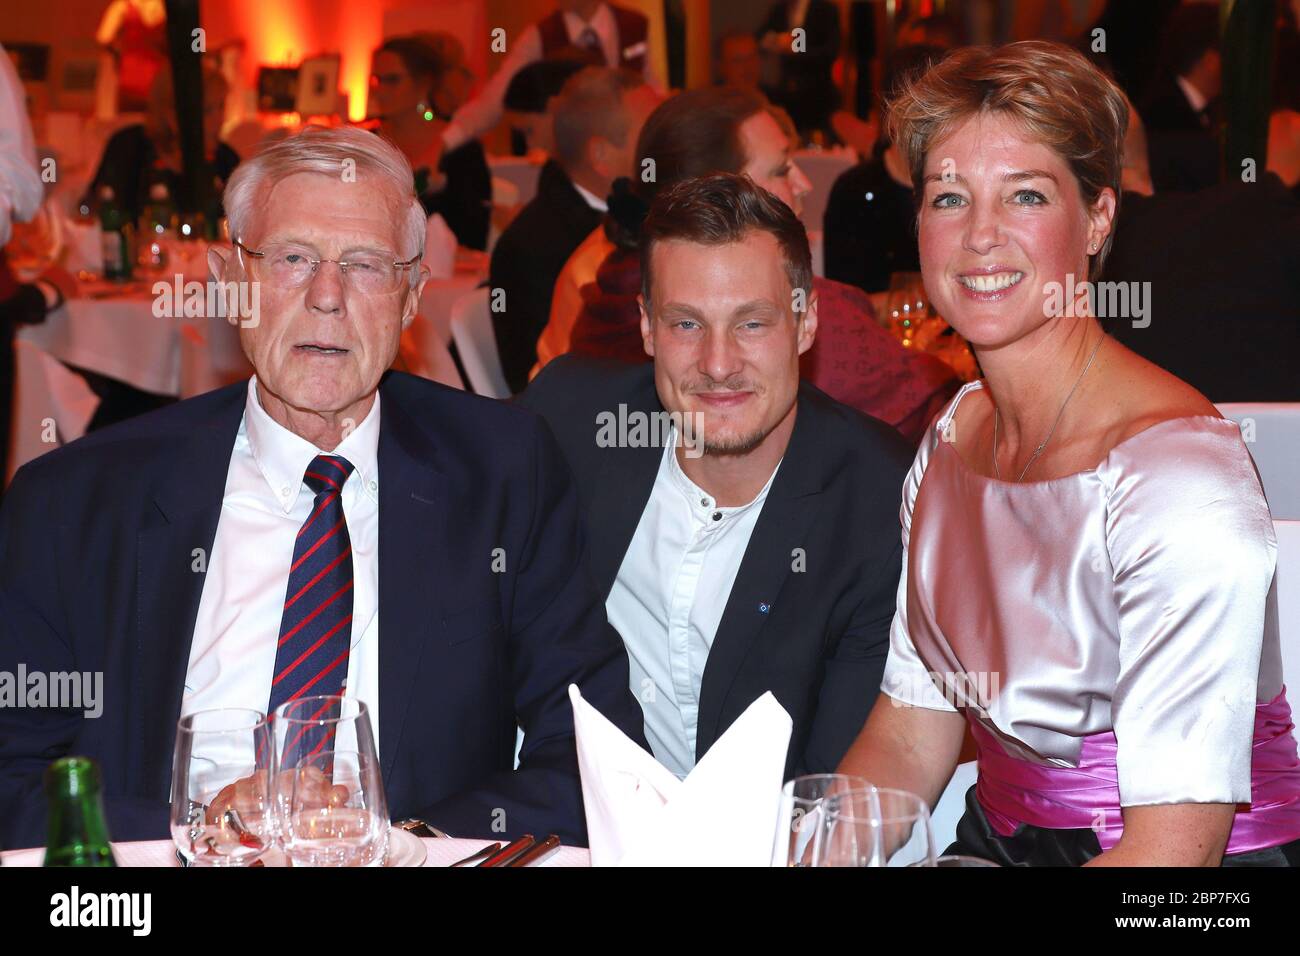 Eugen Block,Marcell Jansen,Christina Block,Night of The Butterflies Charity Ball for the German Muscle Wasting Aid (Ex- Ball Papillion) at the Hotel Grand Elyssee,Hamburg,26.10.2019 Stock Photo